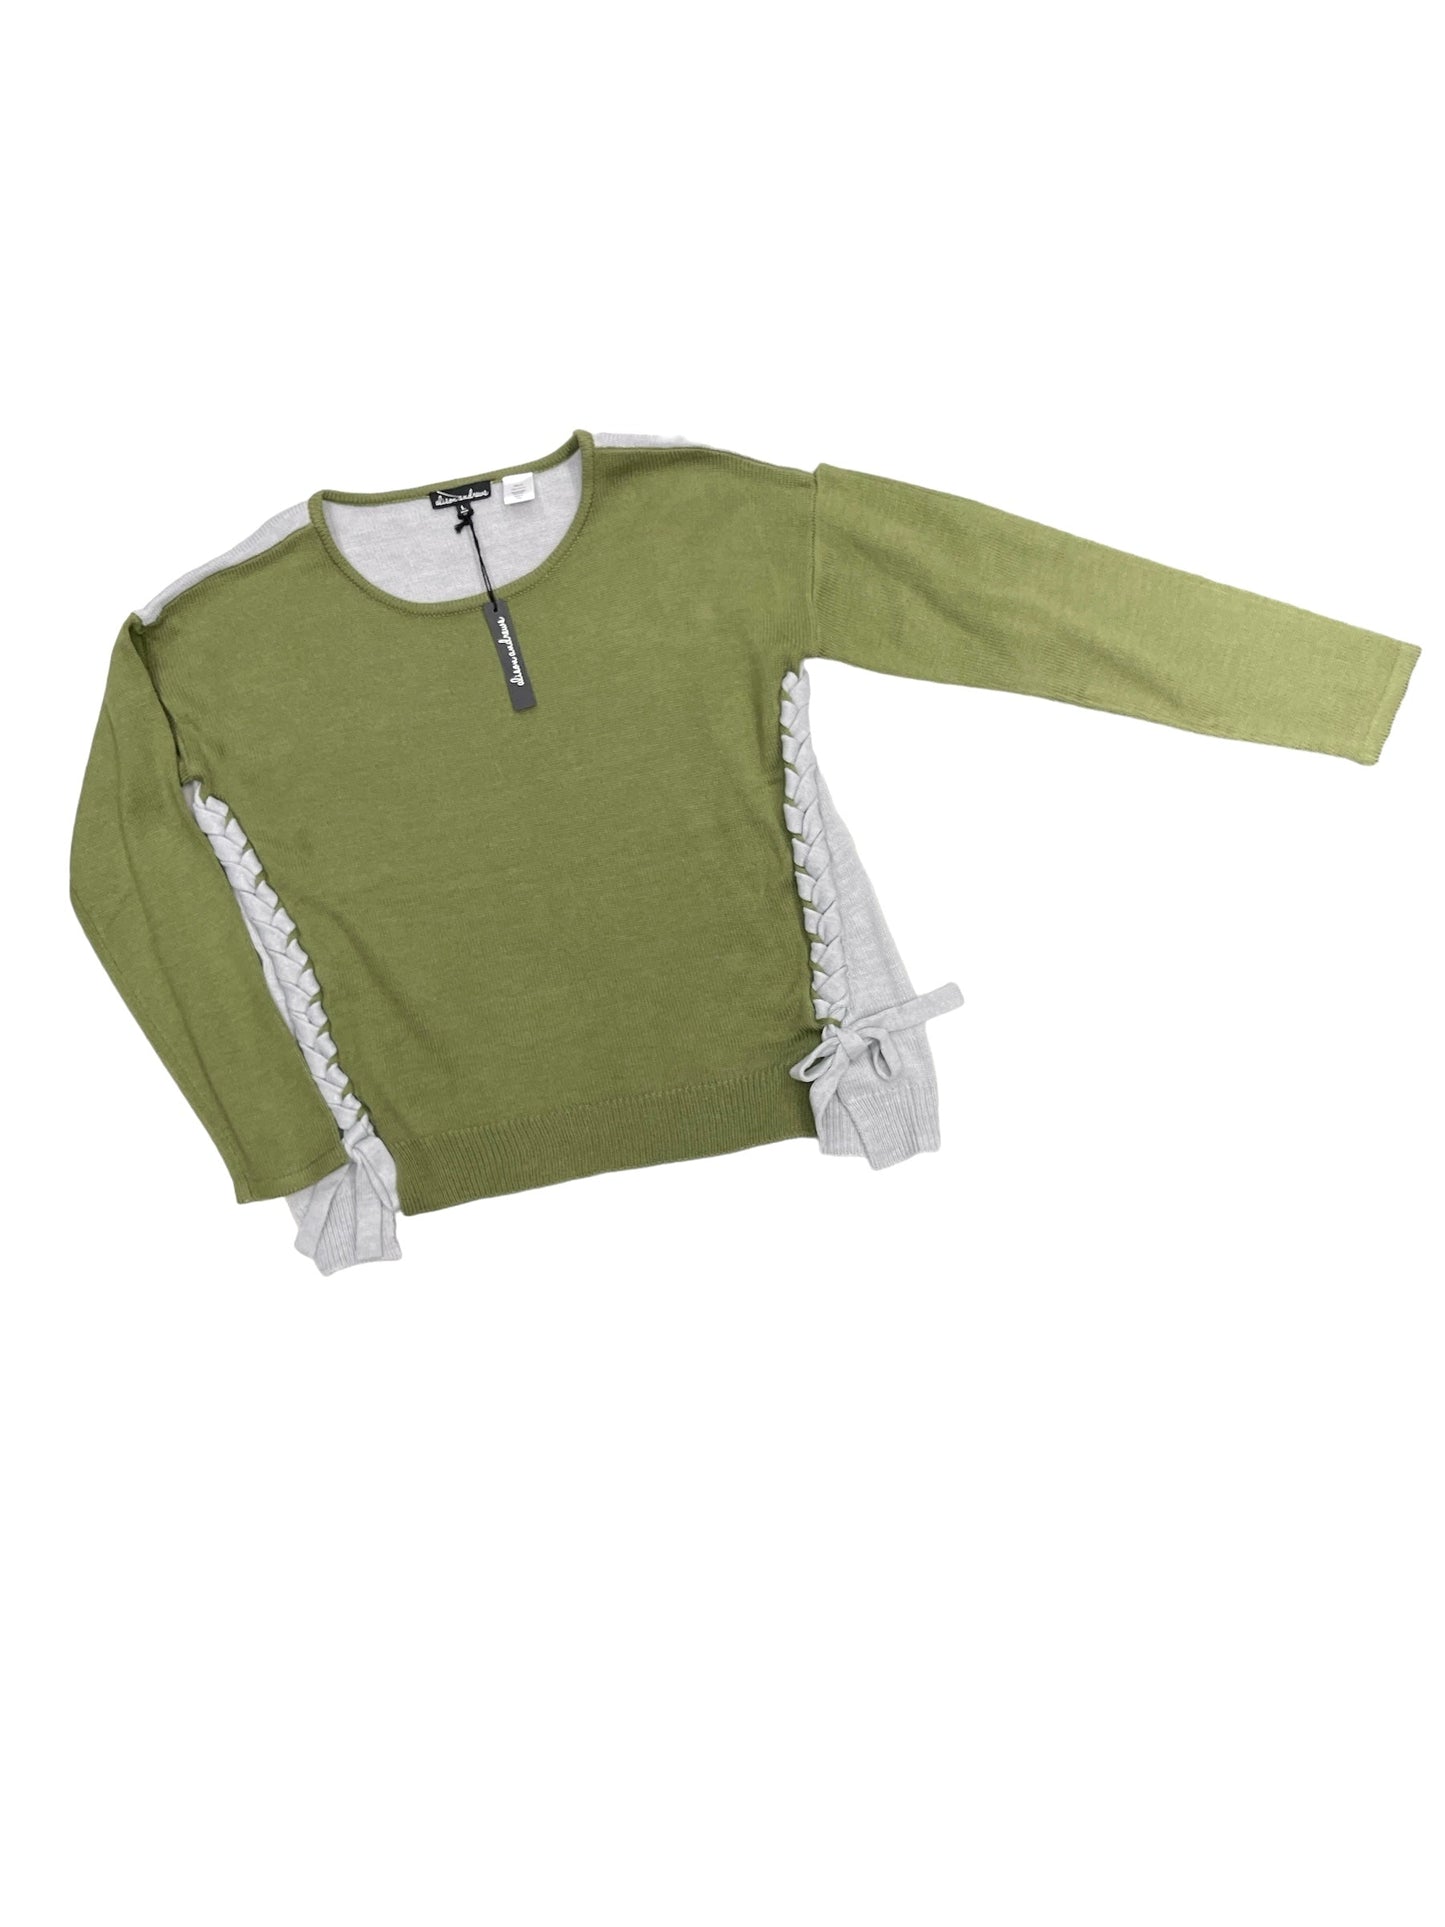 Green & Grey Sweater Clothes Mentor, Size L